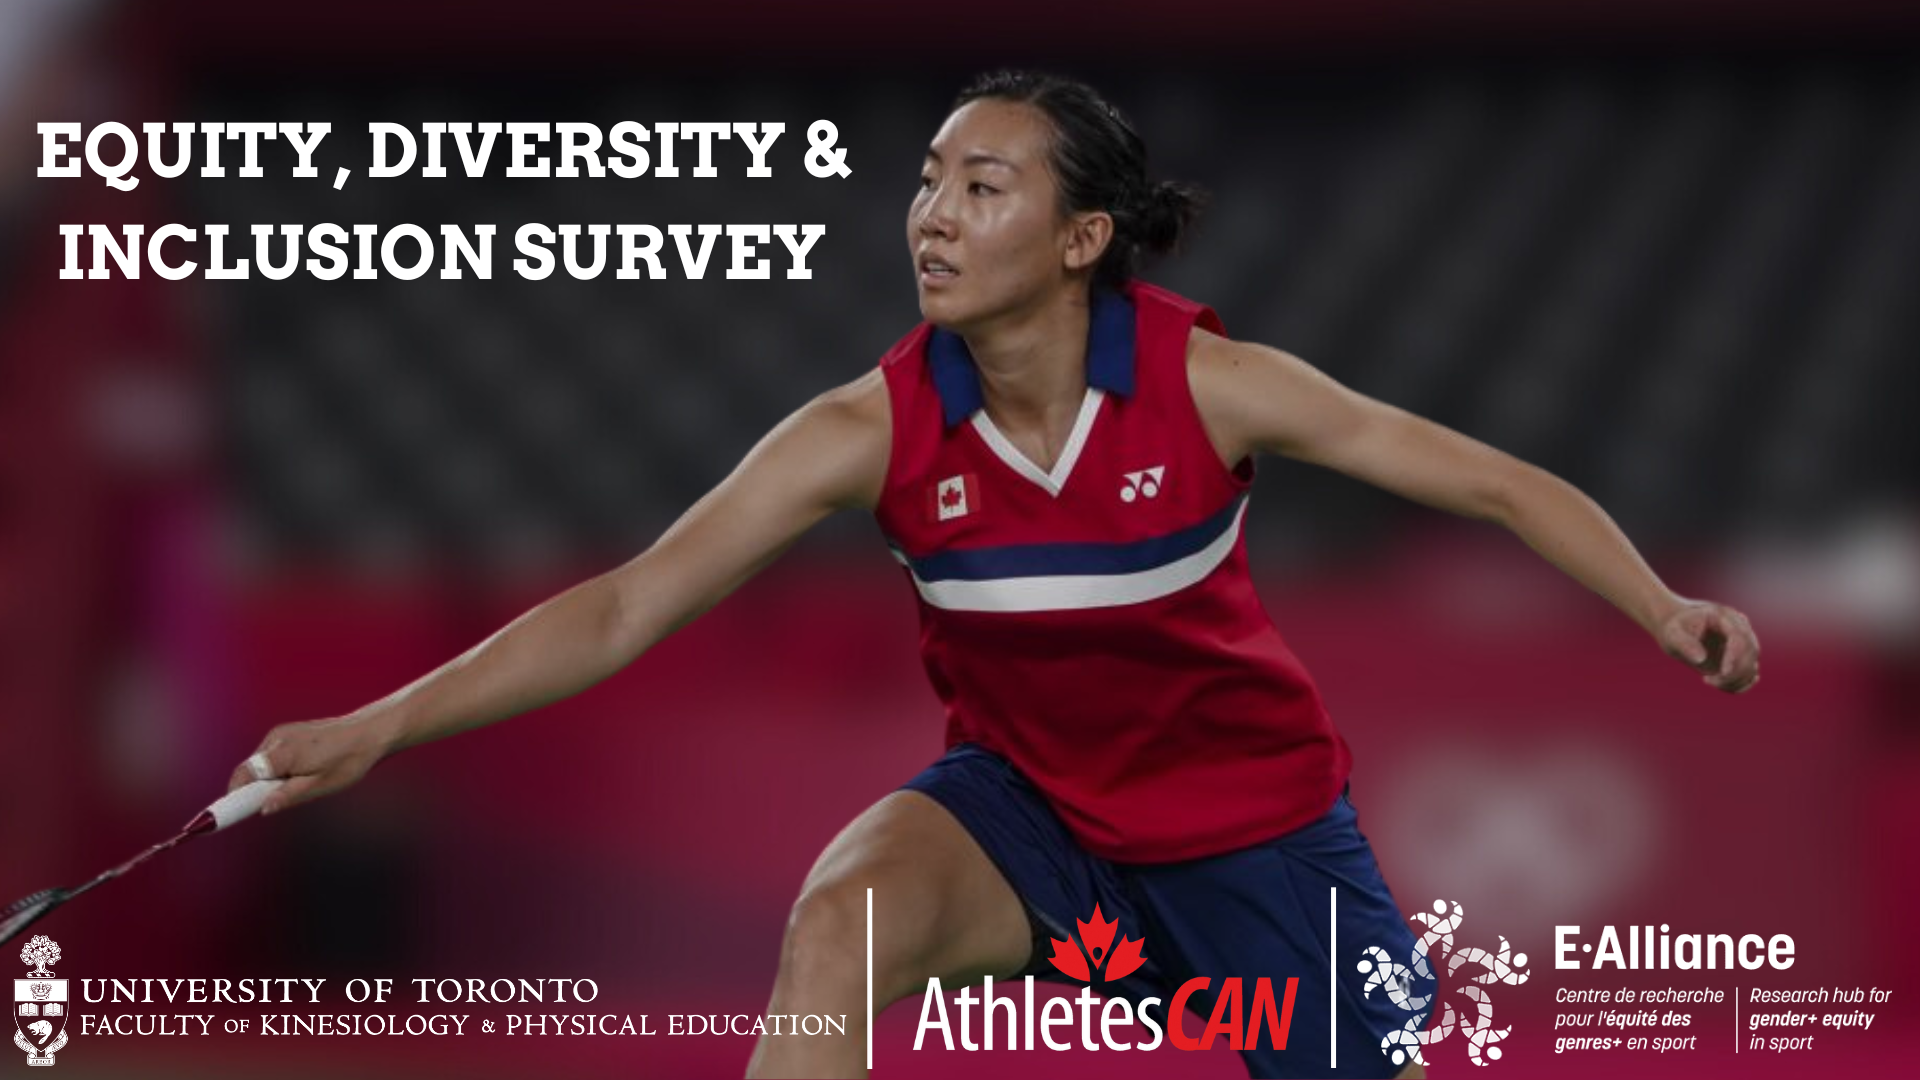 AthletesCAN relaunching EDI membership survey in partnership with U of T and E-Alliance